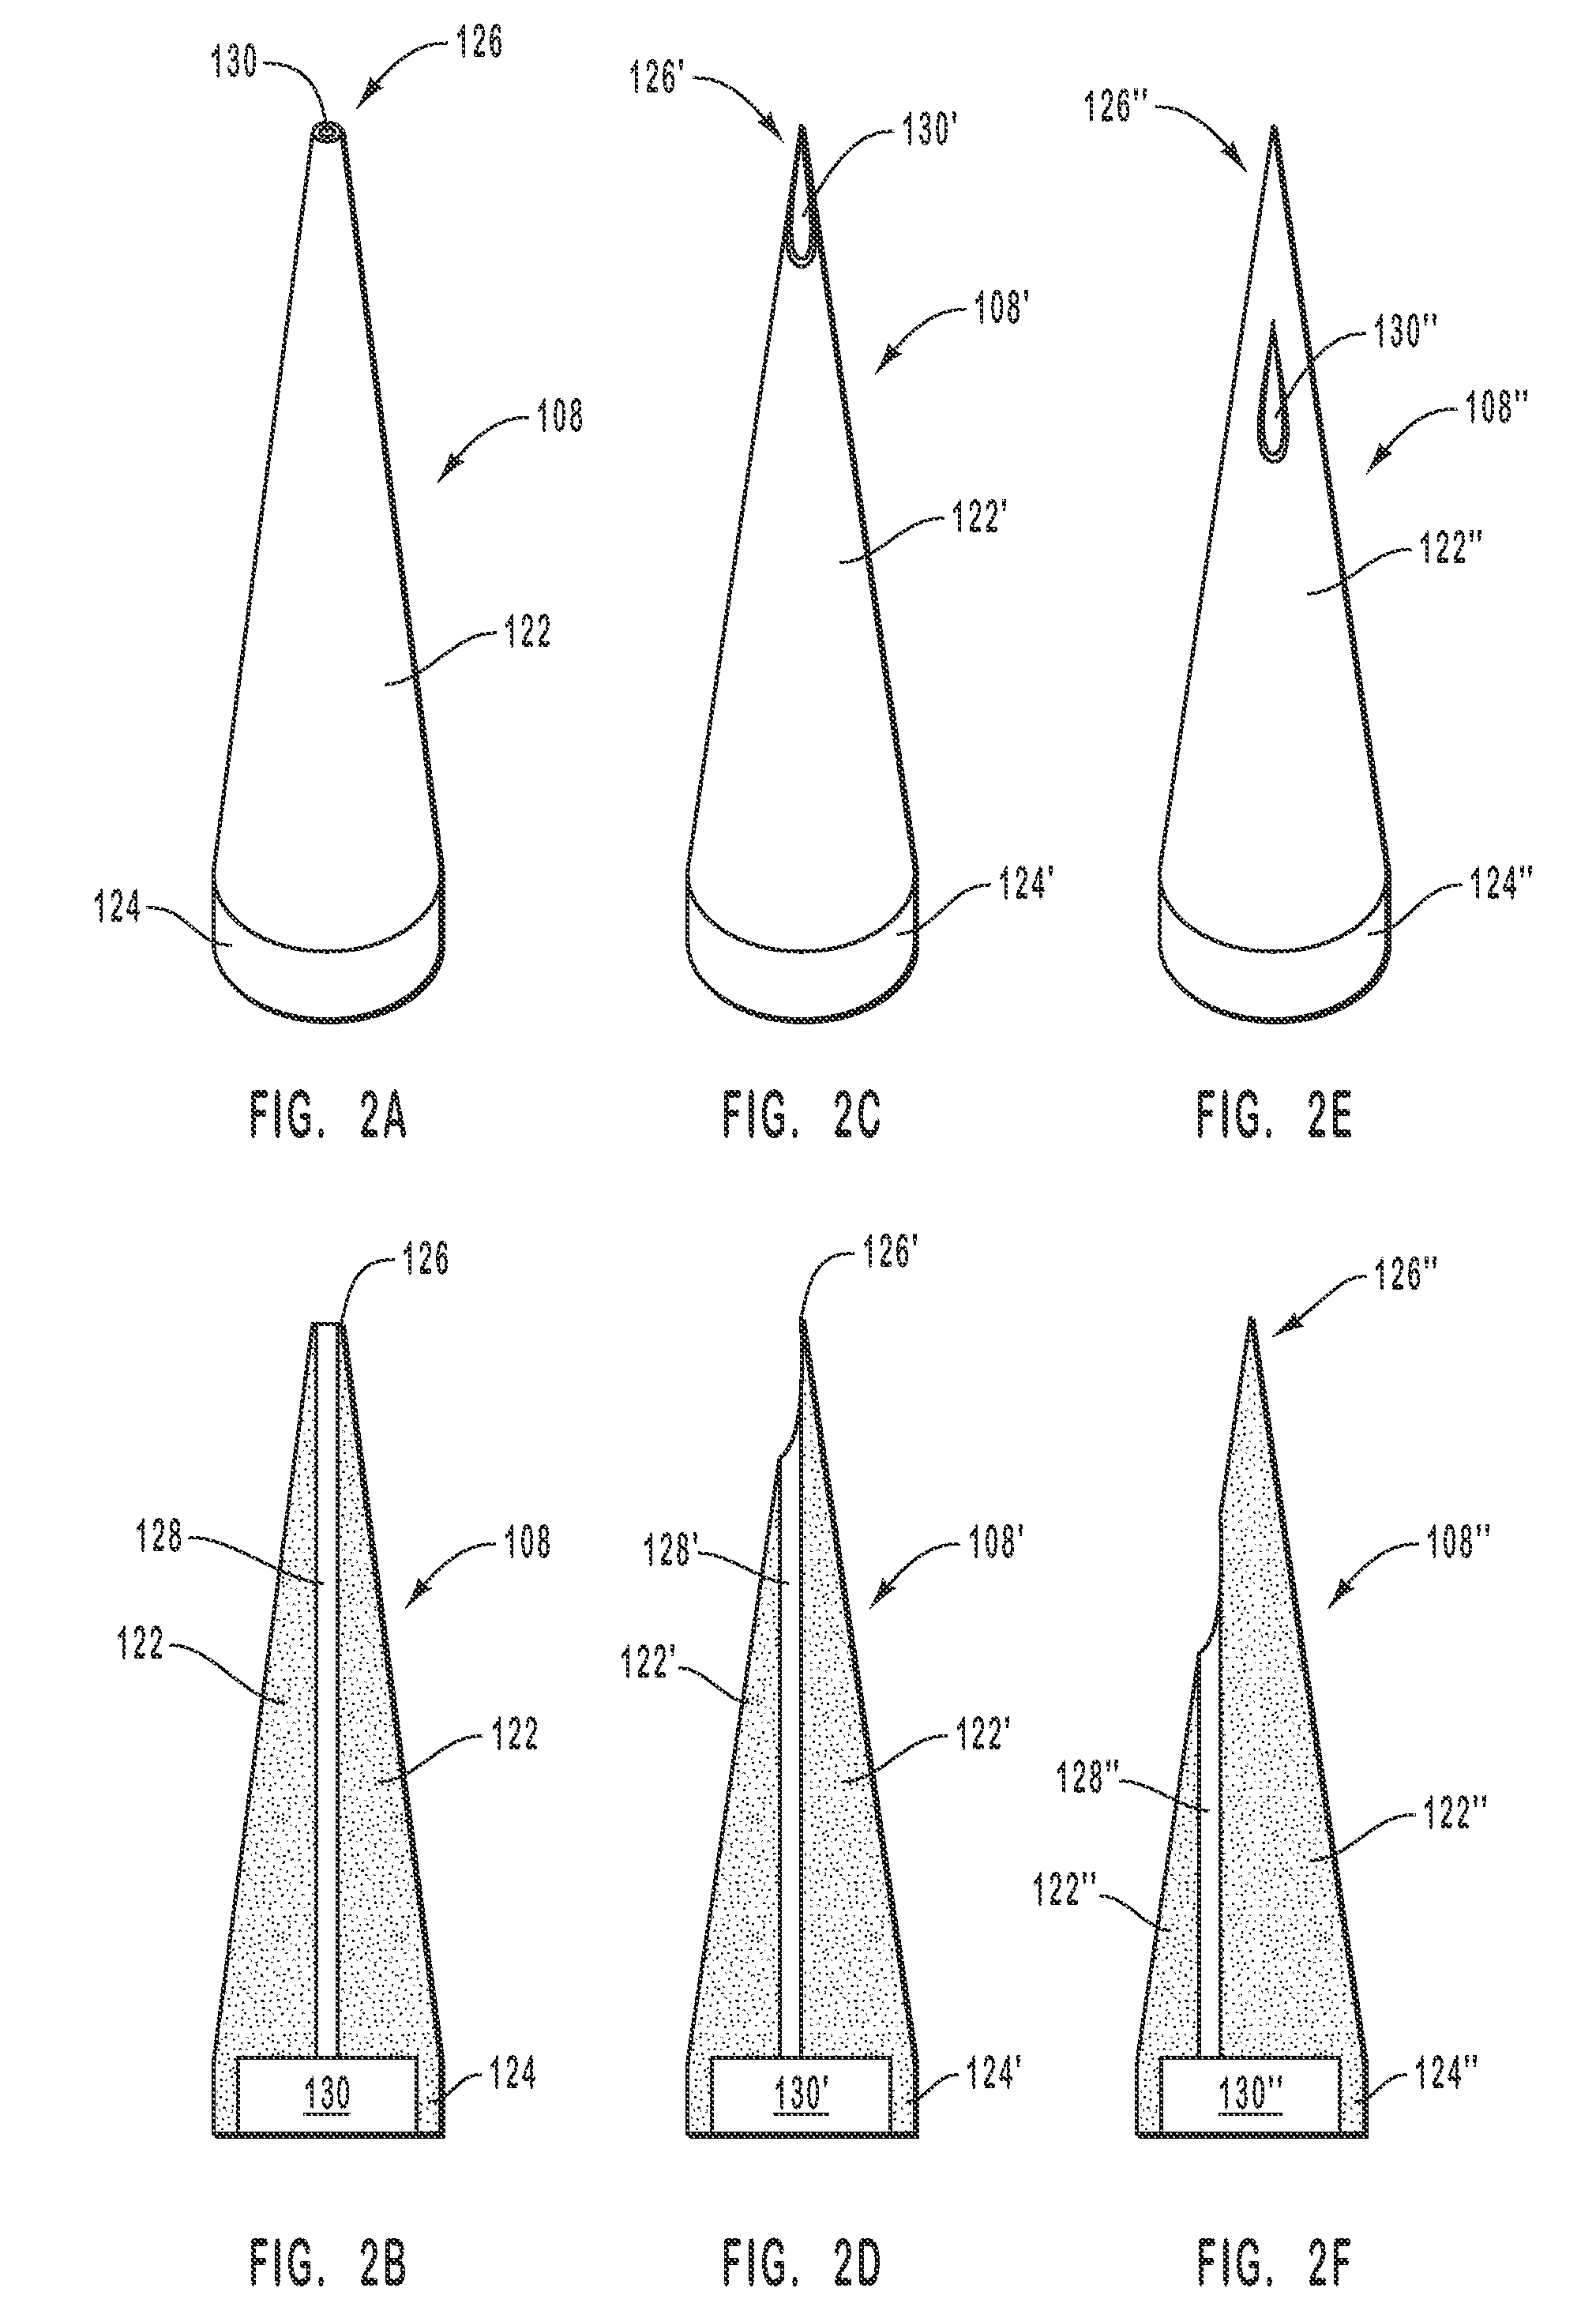 Method of dental tissue injection using an array of micro-needles